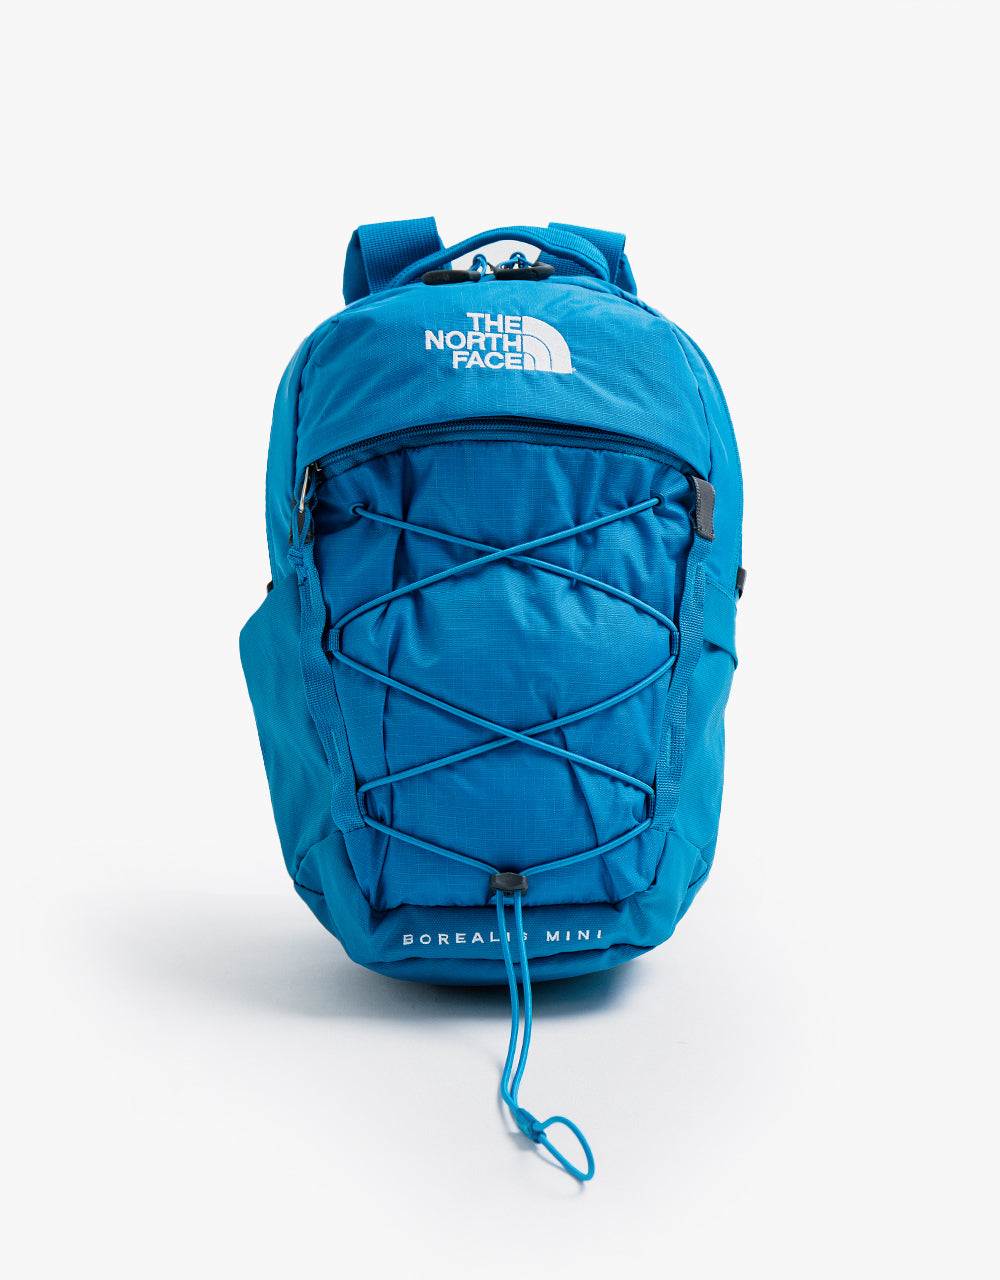 The North Face Borealis Mini Backpack - Banff Blue/TNF White – Route One